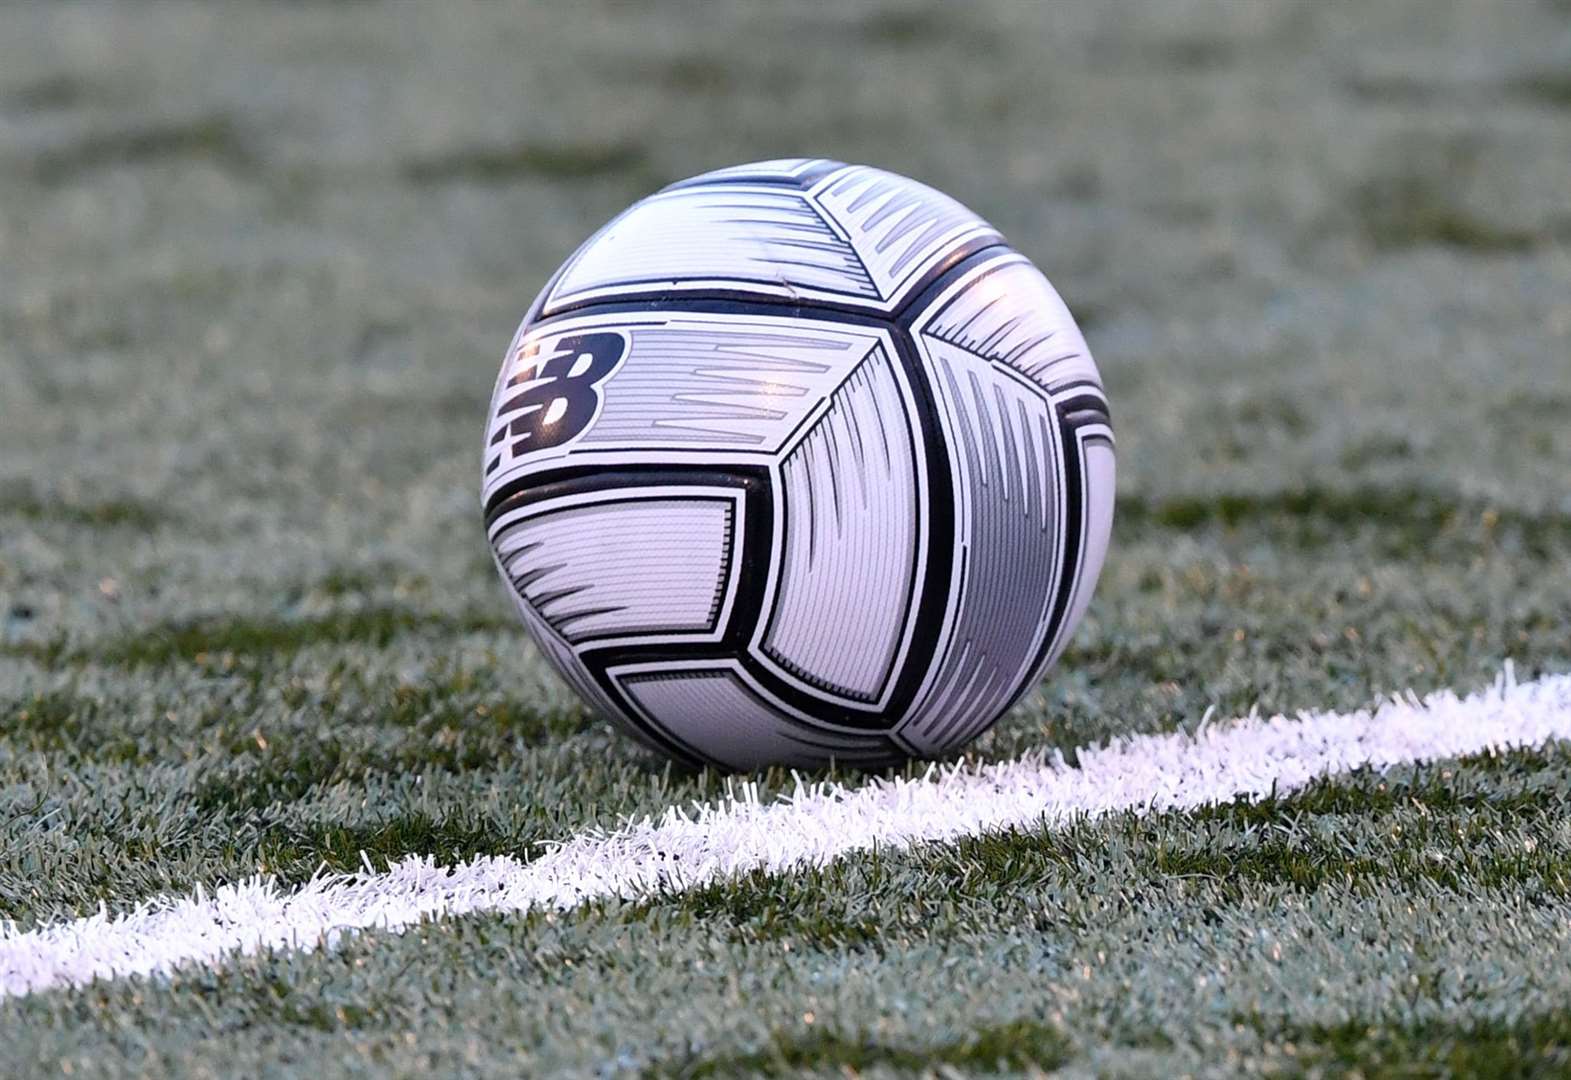 Football fixtures and results: Saturday January 23 to Wednesday January 27